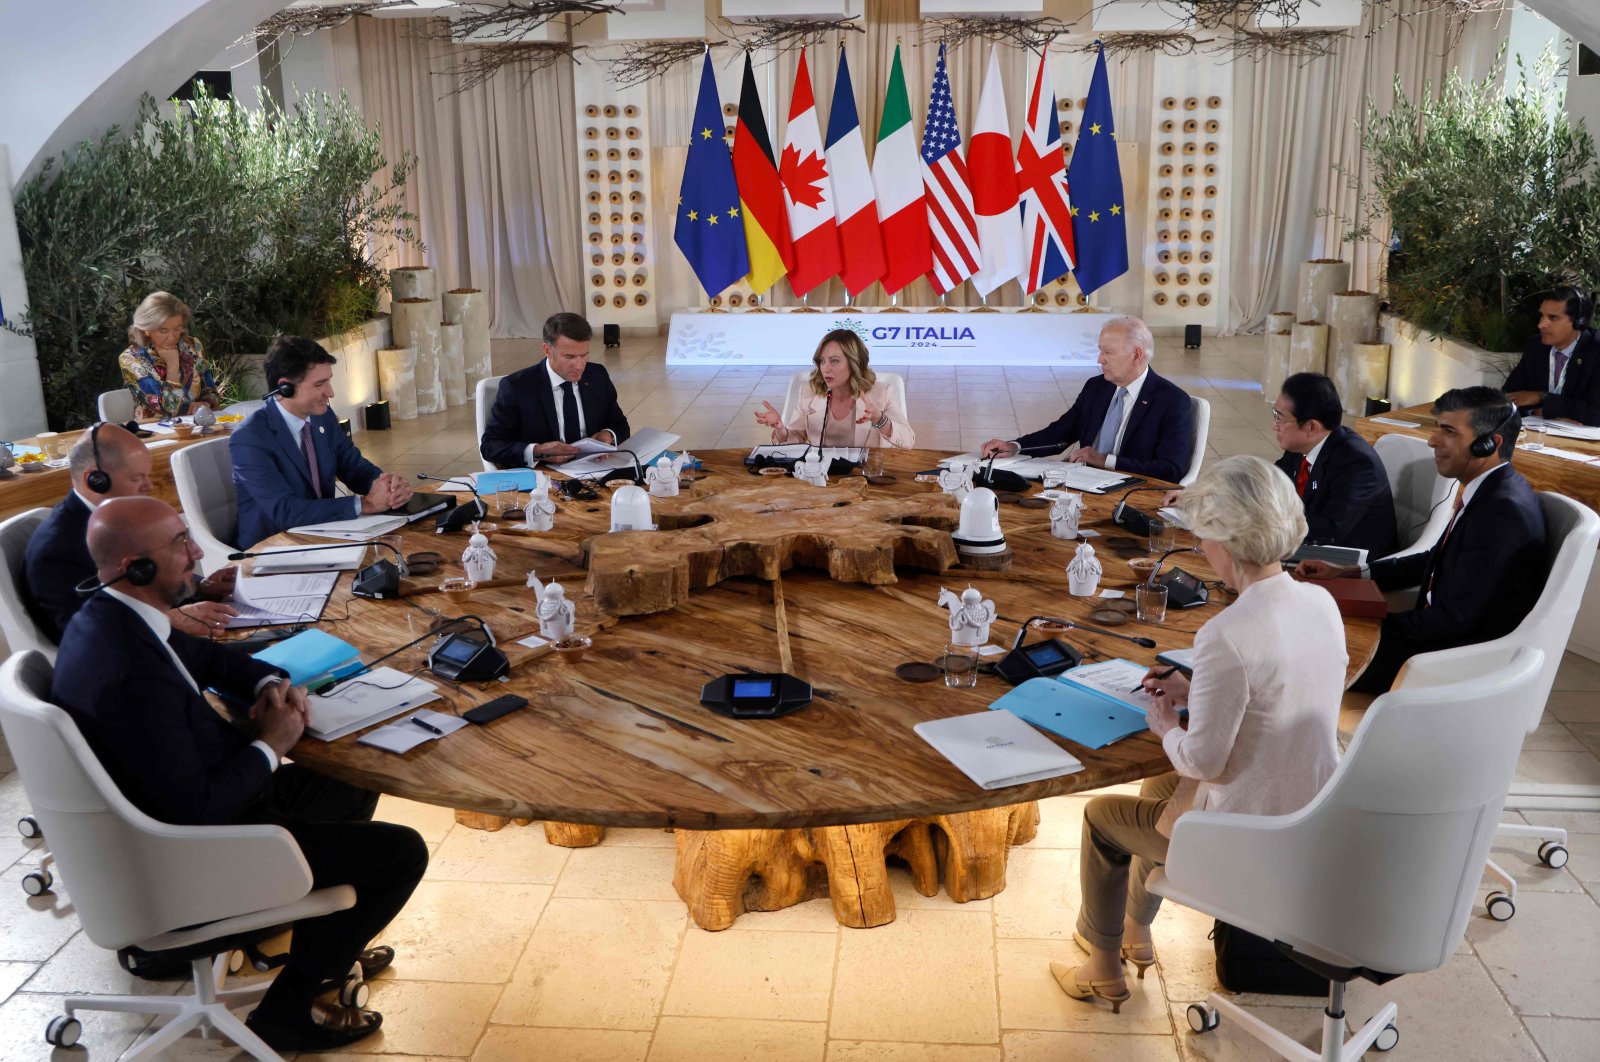 G7 leaders attend a work session at the Borgo Egnazia resort for the G7 Summit hosted by Italy in Apulia region, on June 13, 2024. (AFP Photo)